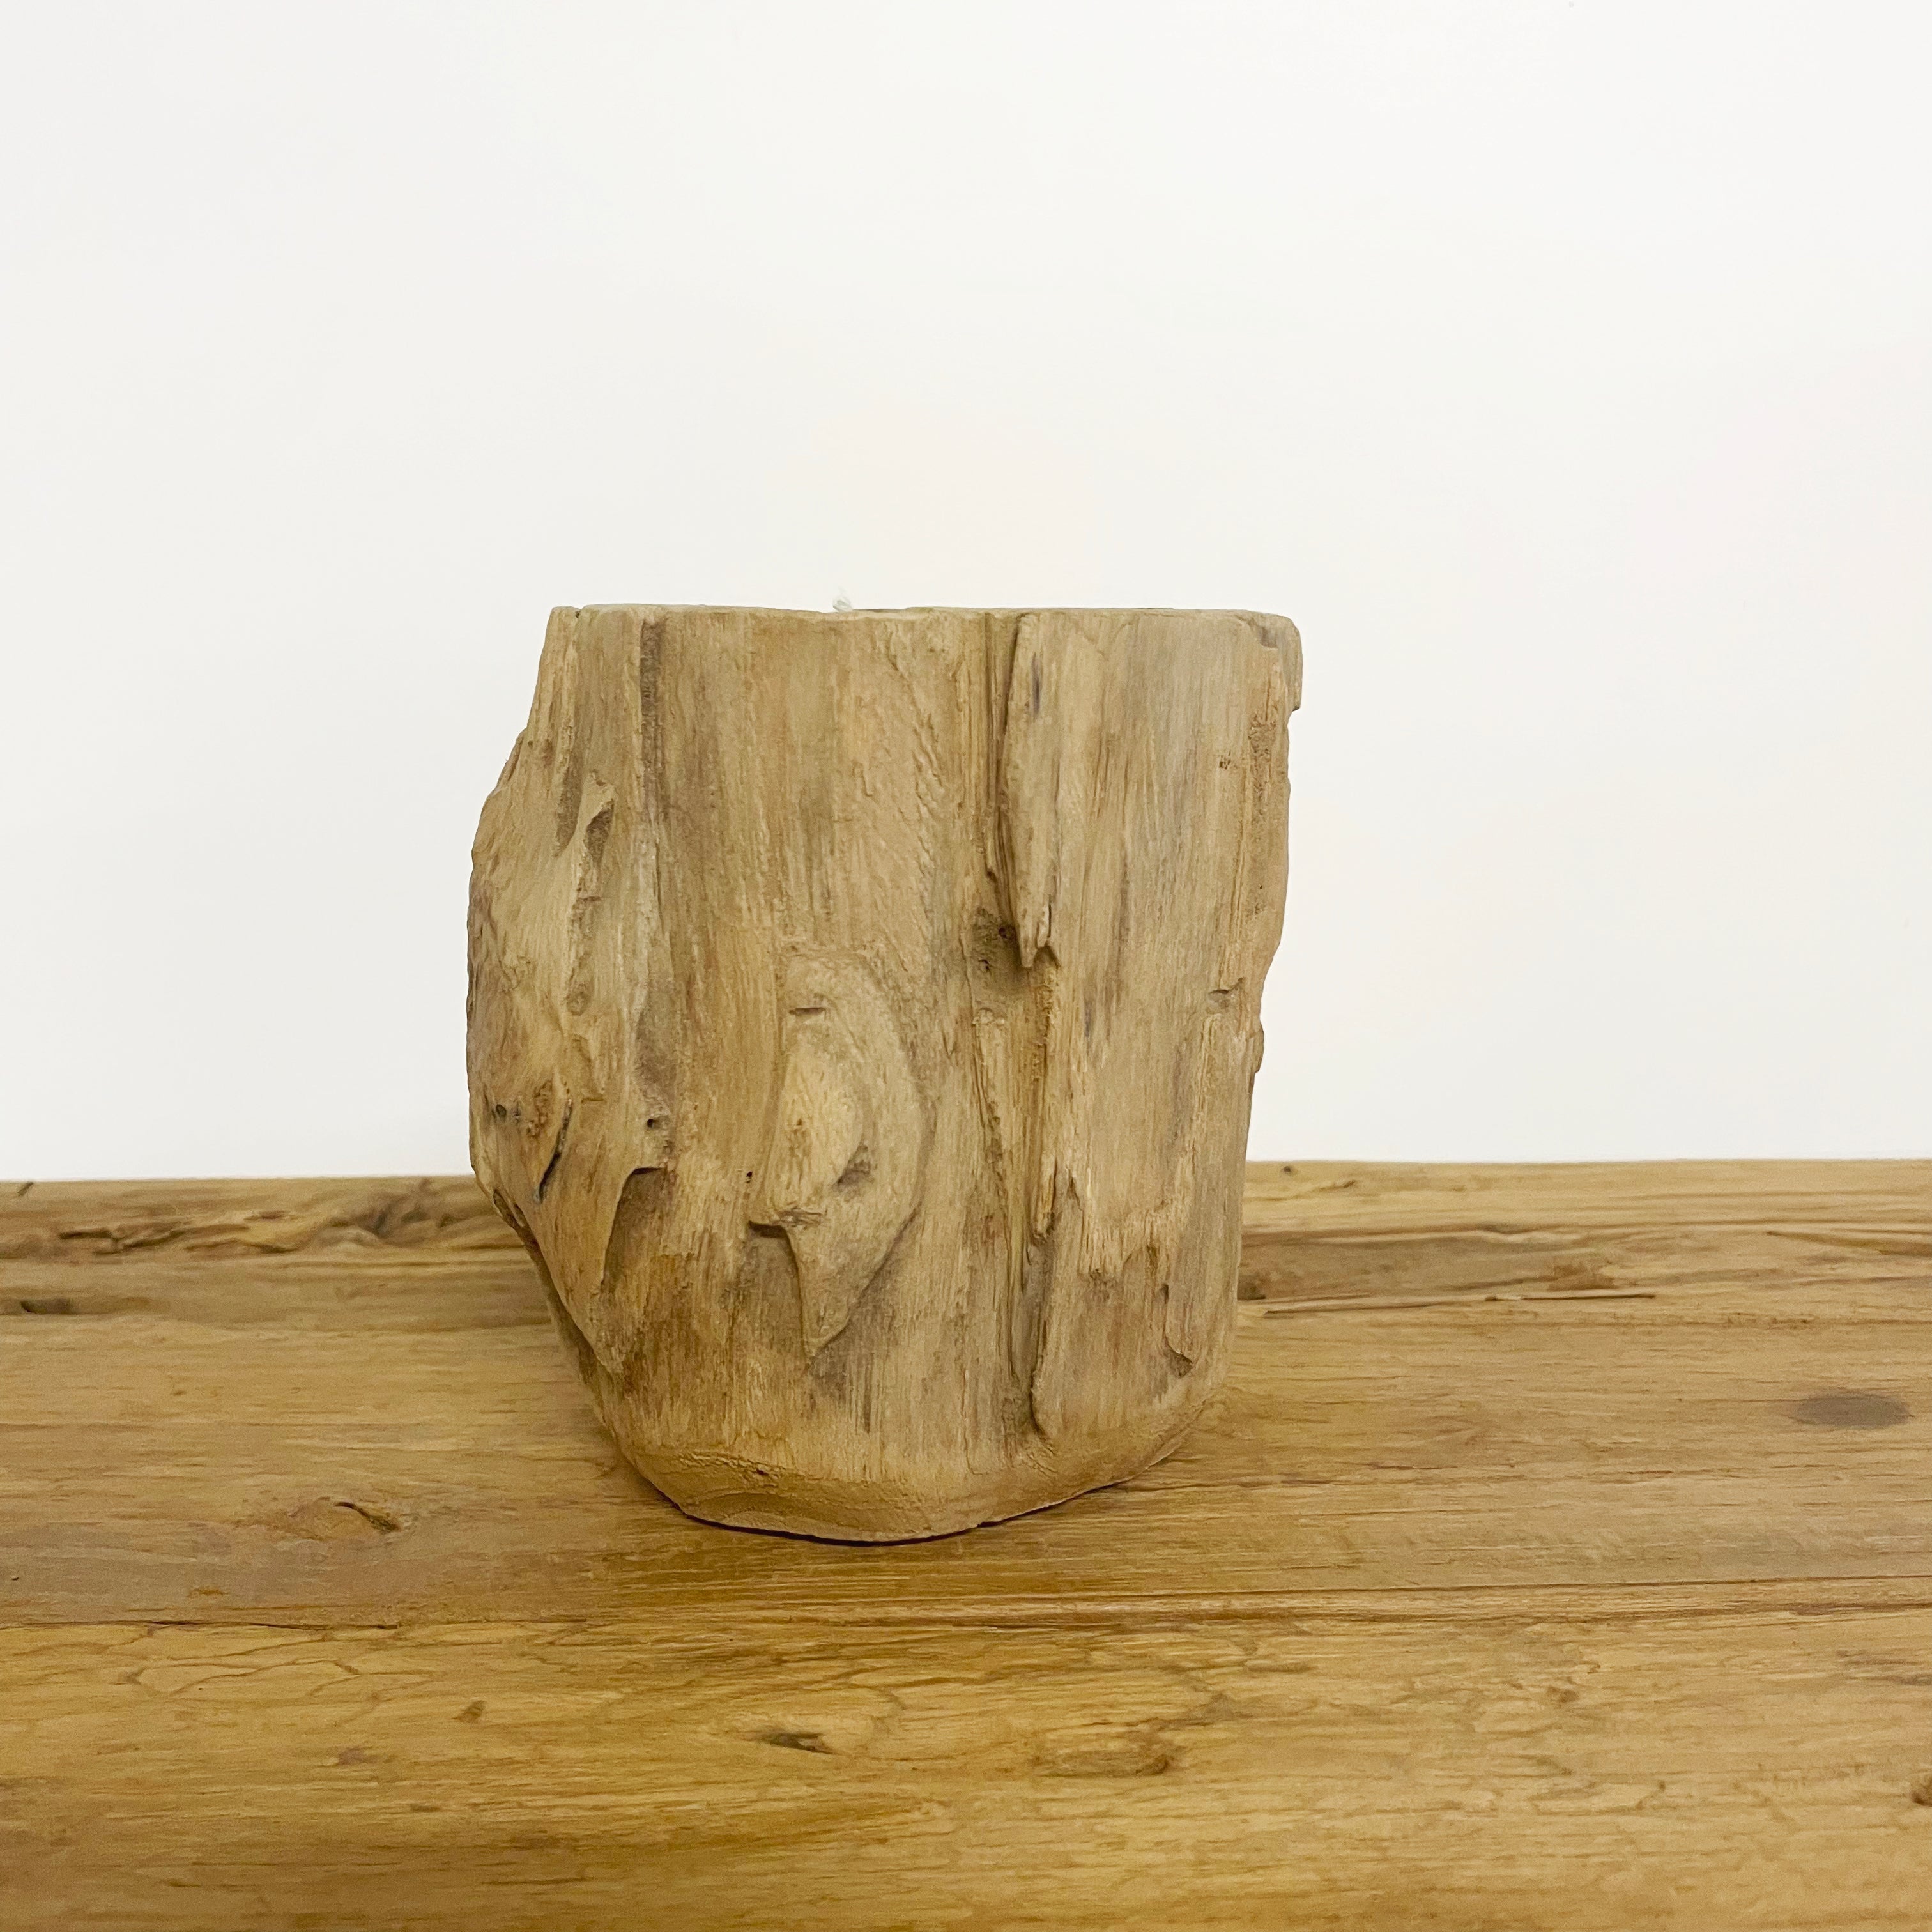 Rustic Teak Candle - Small 11x14cm